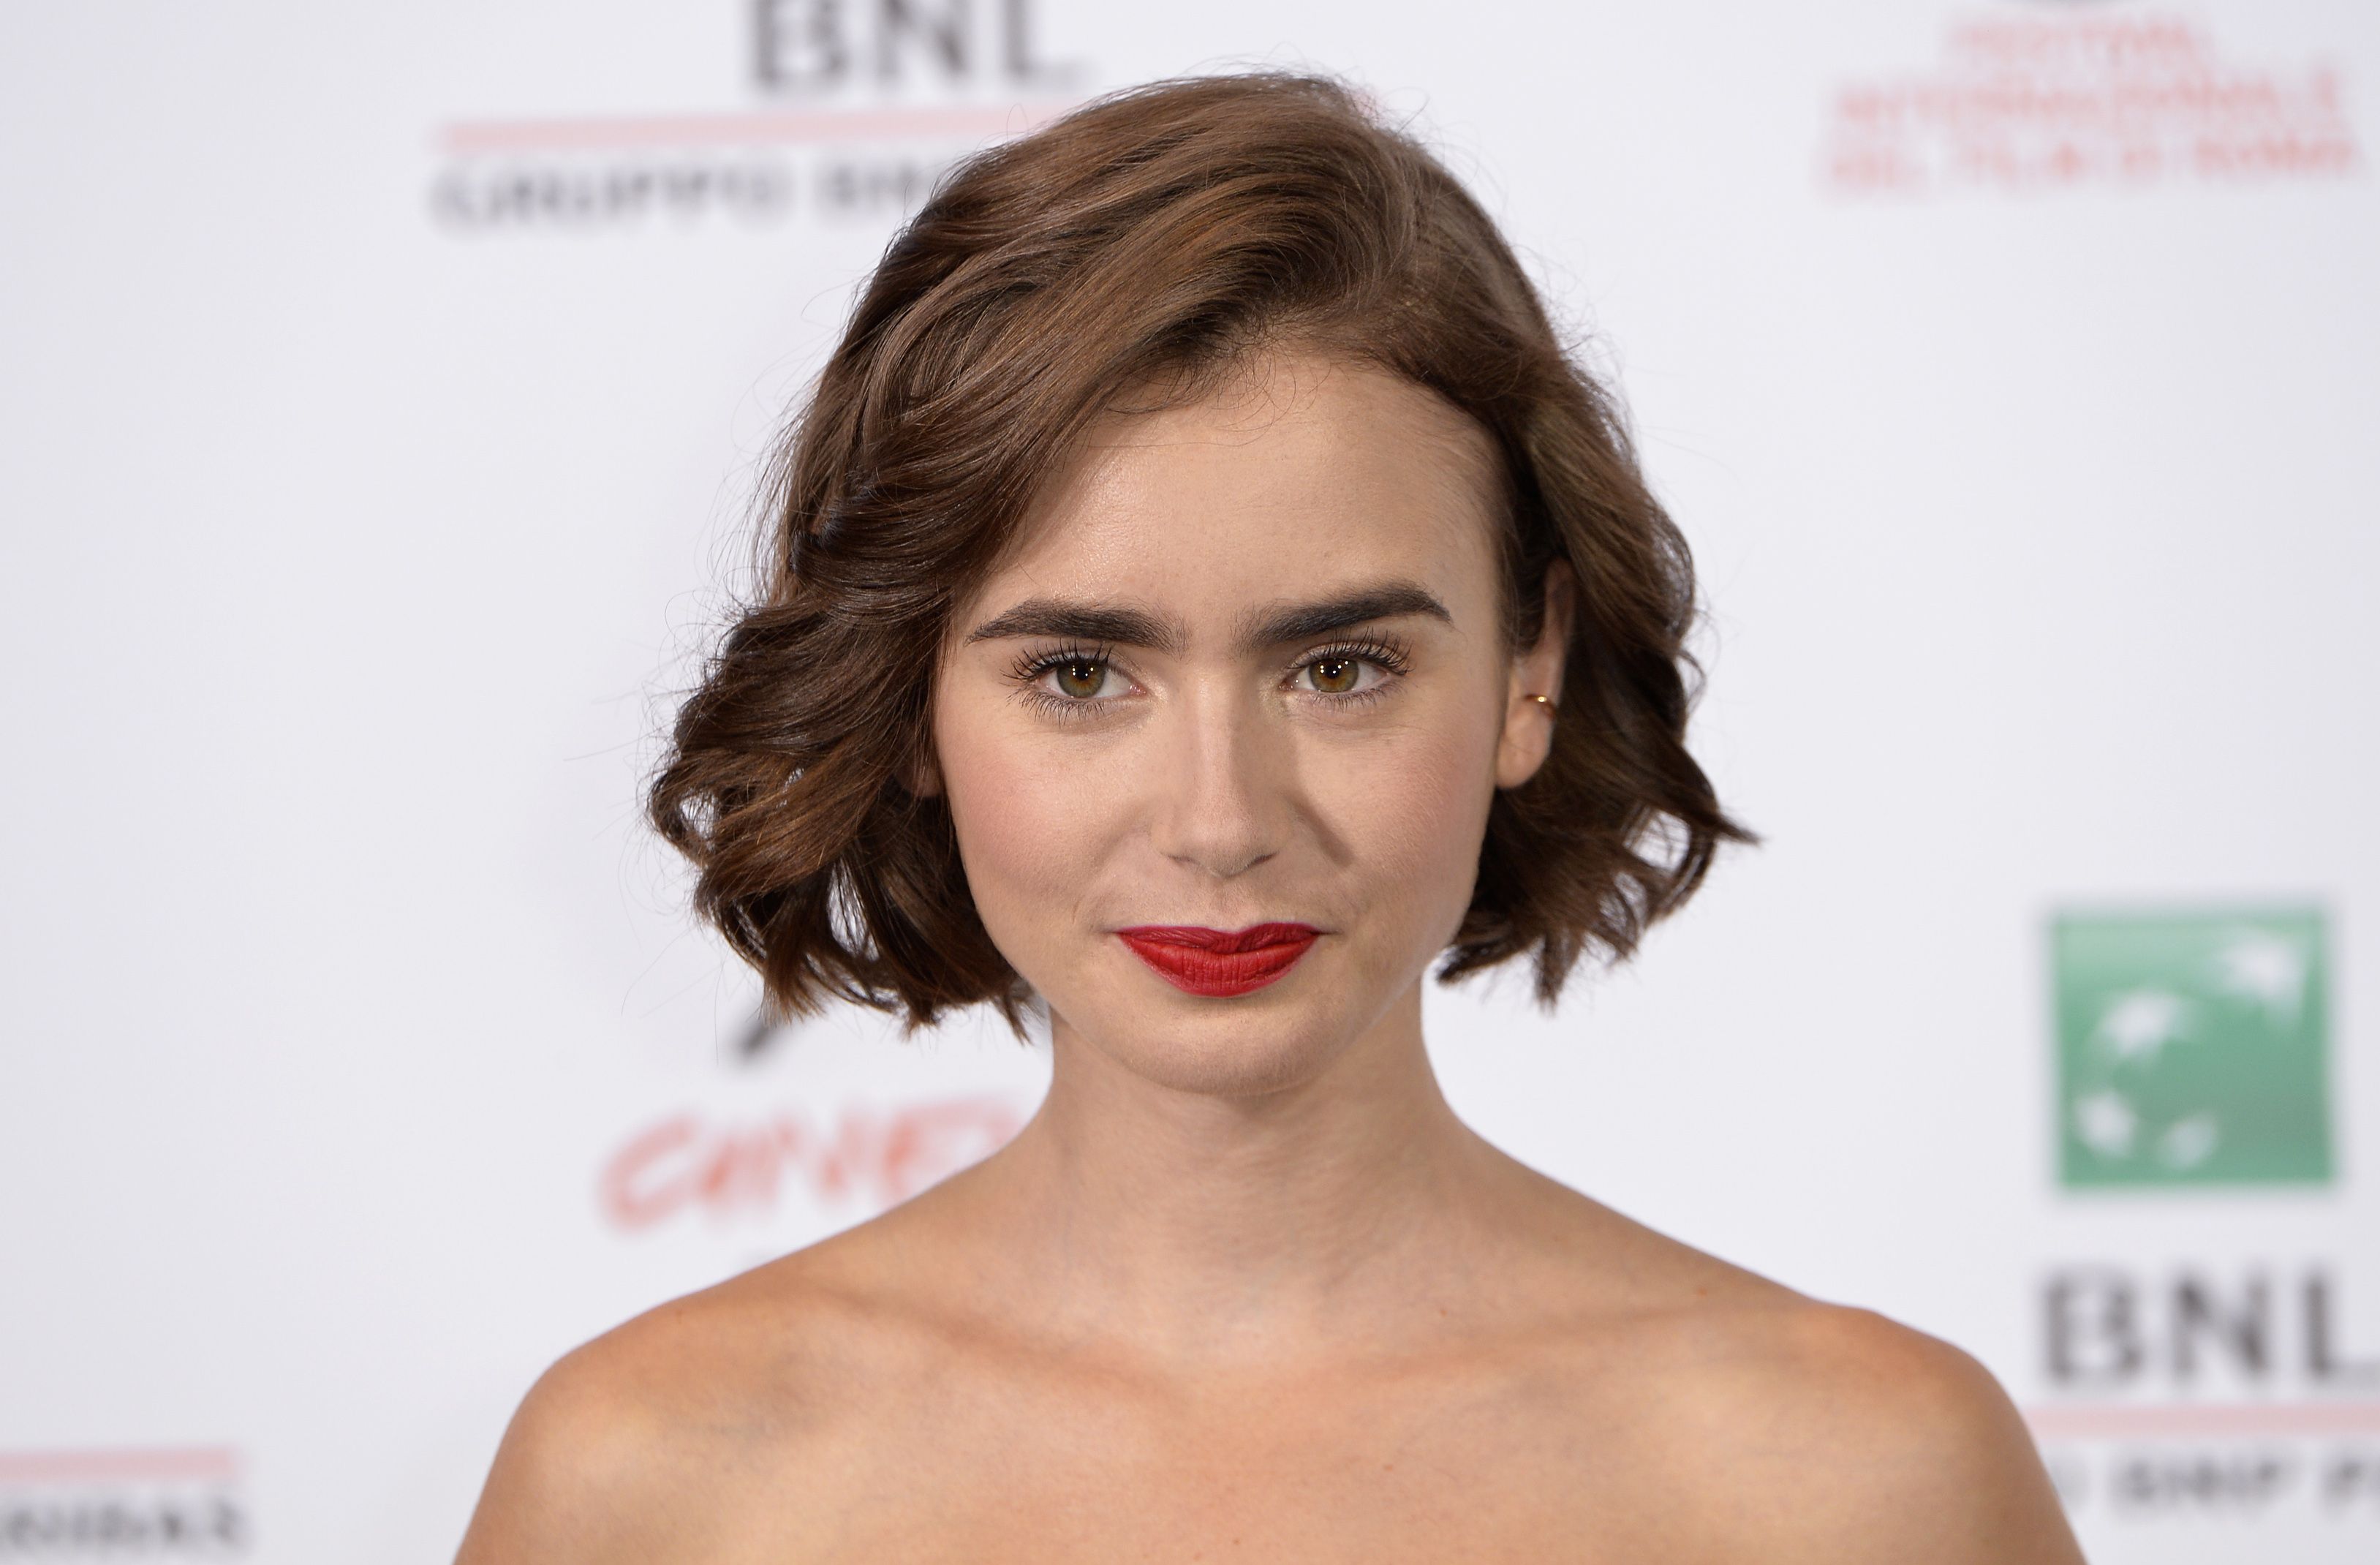 Lily Collins debuts 'mullet bangs' haircut and it's very 60s